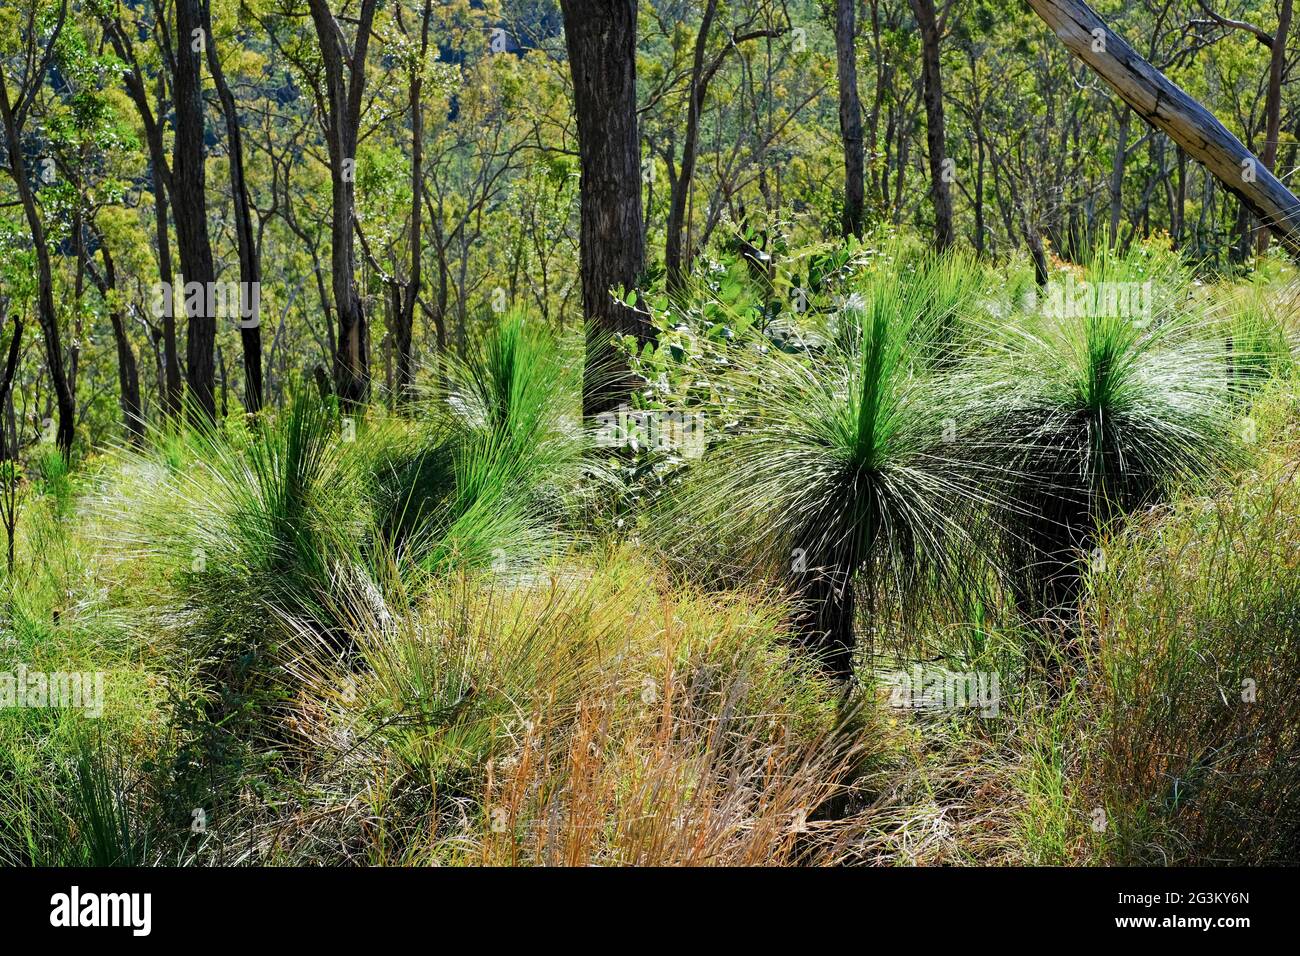 Grasbäume (Xanthorrhoea australis), Upper Clarence River, Clarence River Wilderness Lodge, Paddy's Flat, New South Wales, Australien Stockfoto